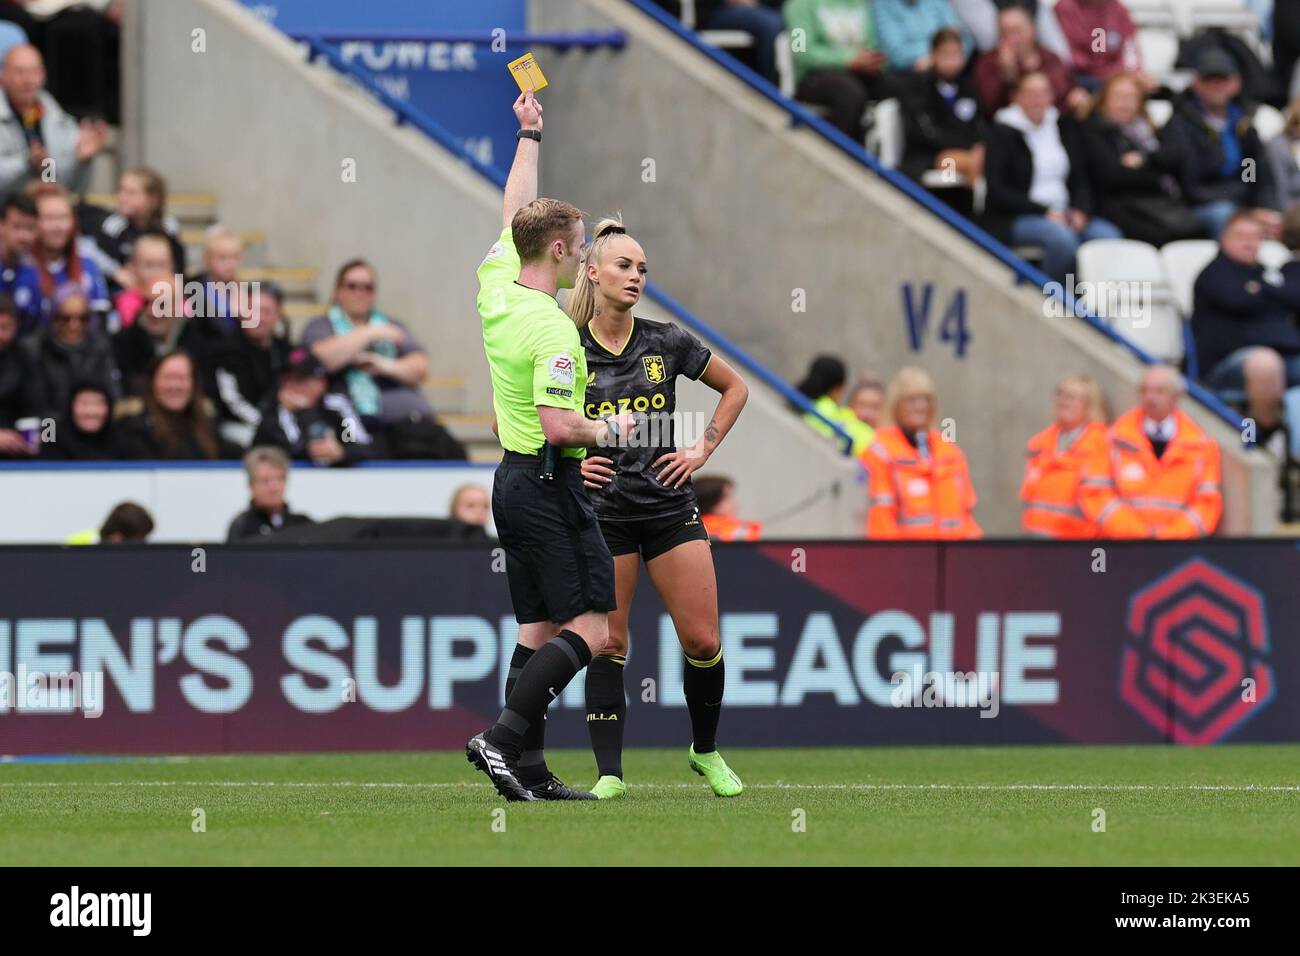 Leicester, UK. 25th Sep, 2022. Leicester, England, September 25th 2022: Tom Parsons (Match referee) shows a yellow card to Alisha Lehmann (7 Aston Villa) during the Barclays FA Womens Super League game between Leicester City and Aston Villa at the King Power Stadium in Leicester, England. (James Holyoak/SPP) Credit: SPP Sport Press Photo. /Alamy Live News Stock Photo